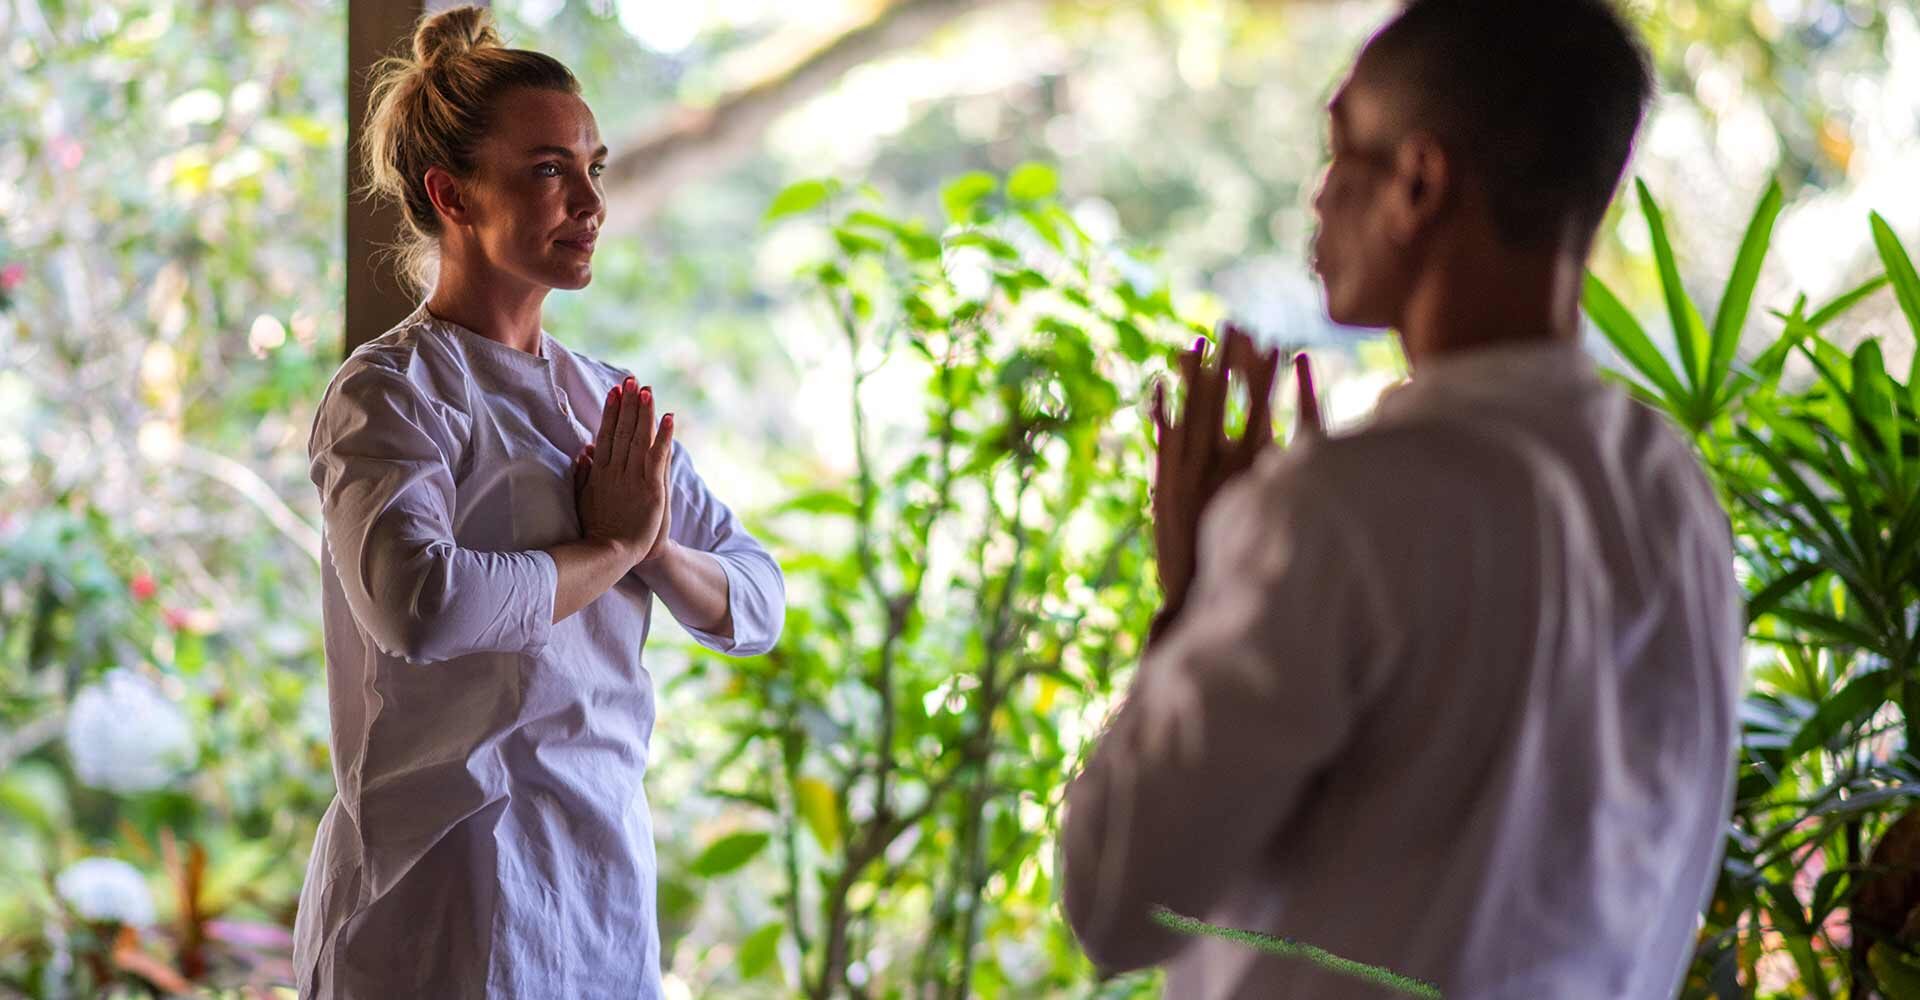 Participating in meditation and yoga is part of the Ayurvedic stress management program.